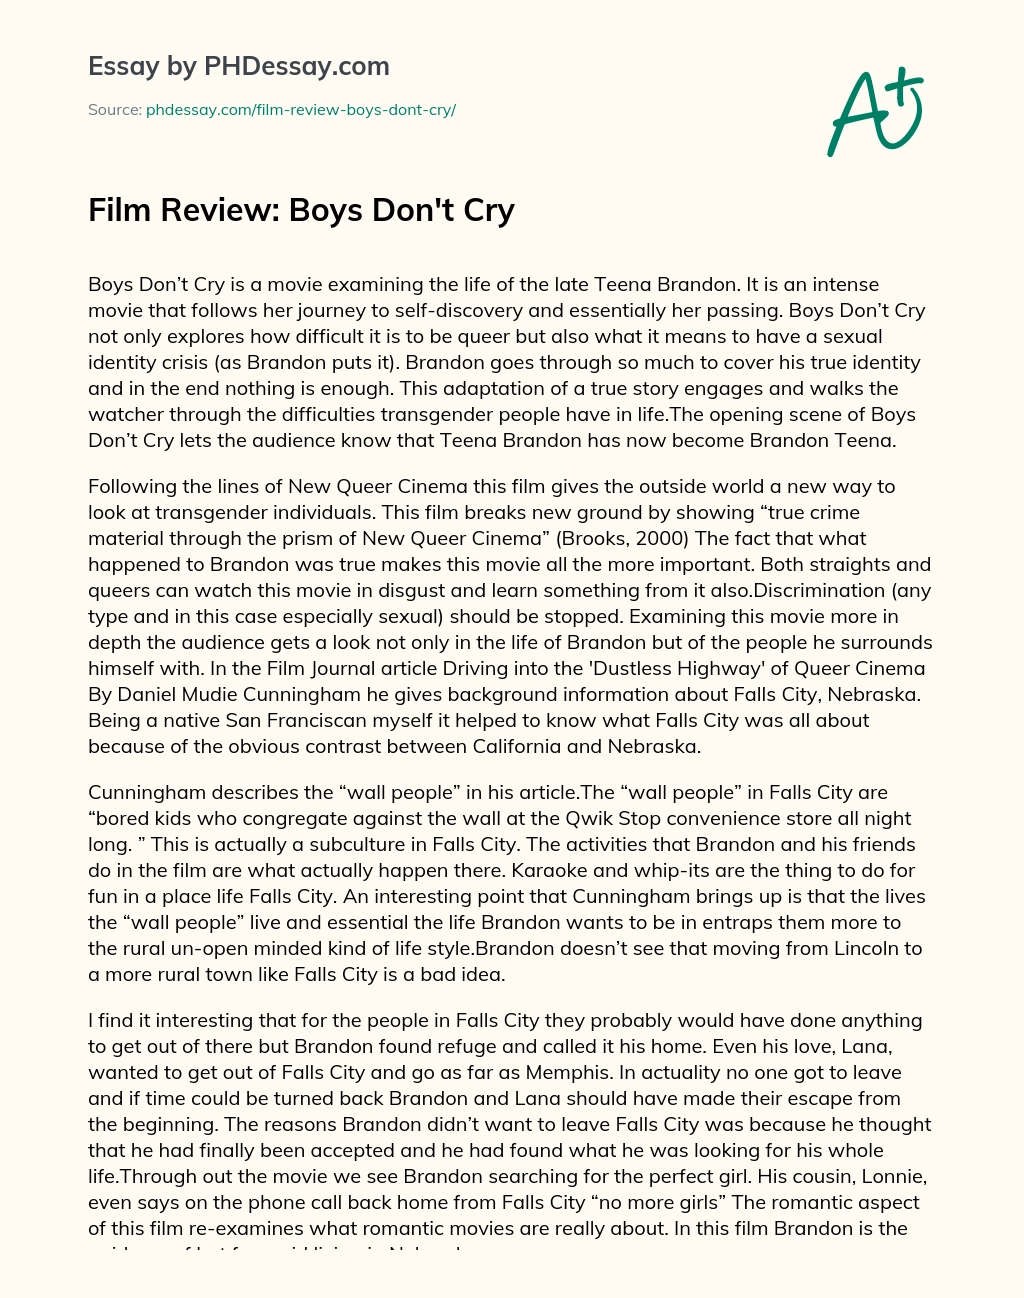 Film Review: Boys Don’t Cry essay